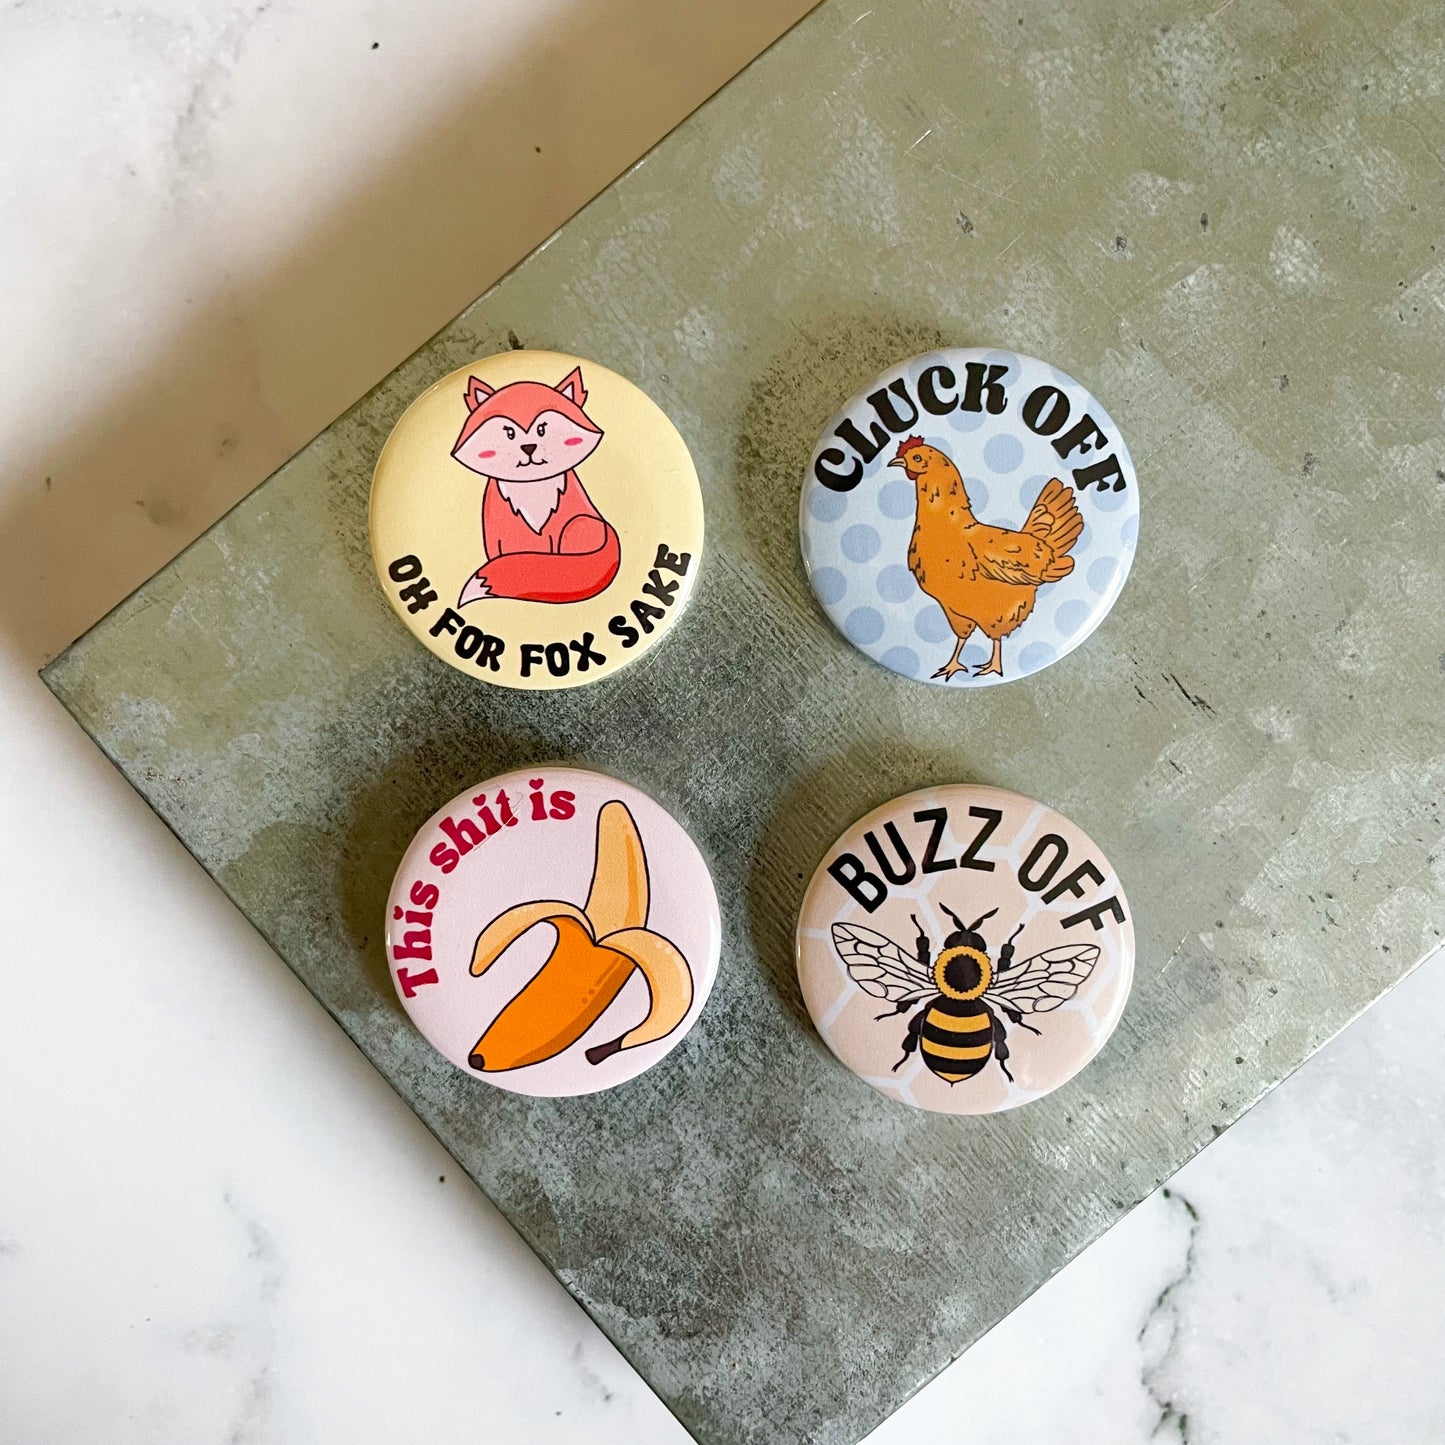 Buzz Off Bee Pun Button / Badge (Buy 4 Get 1 FREE)